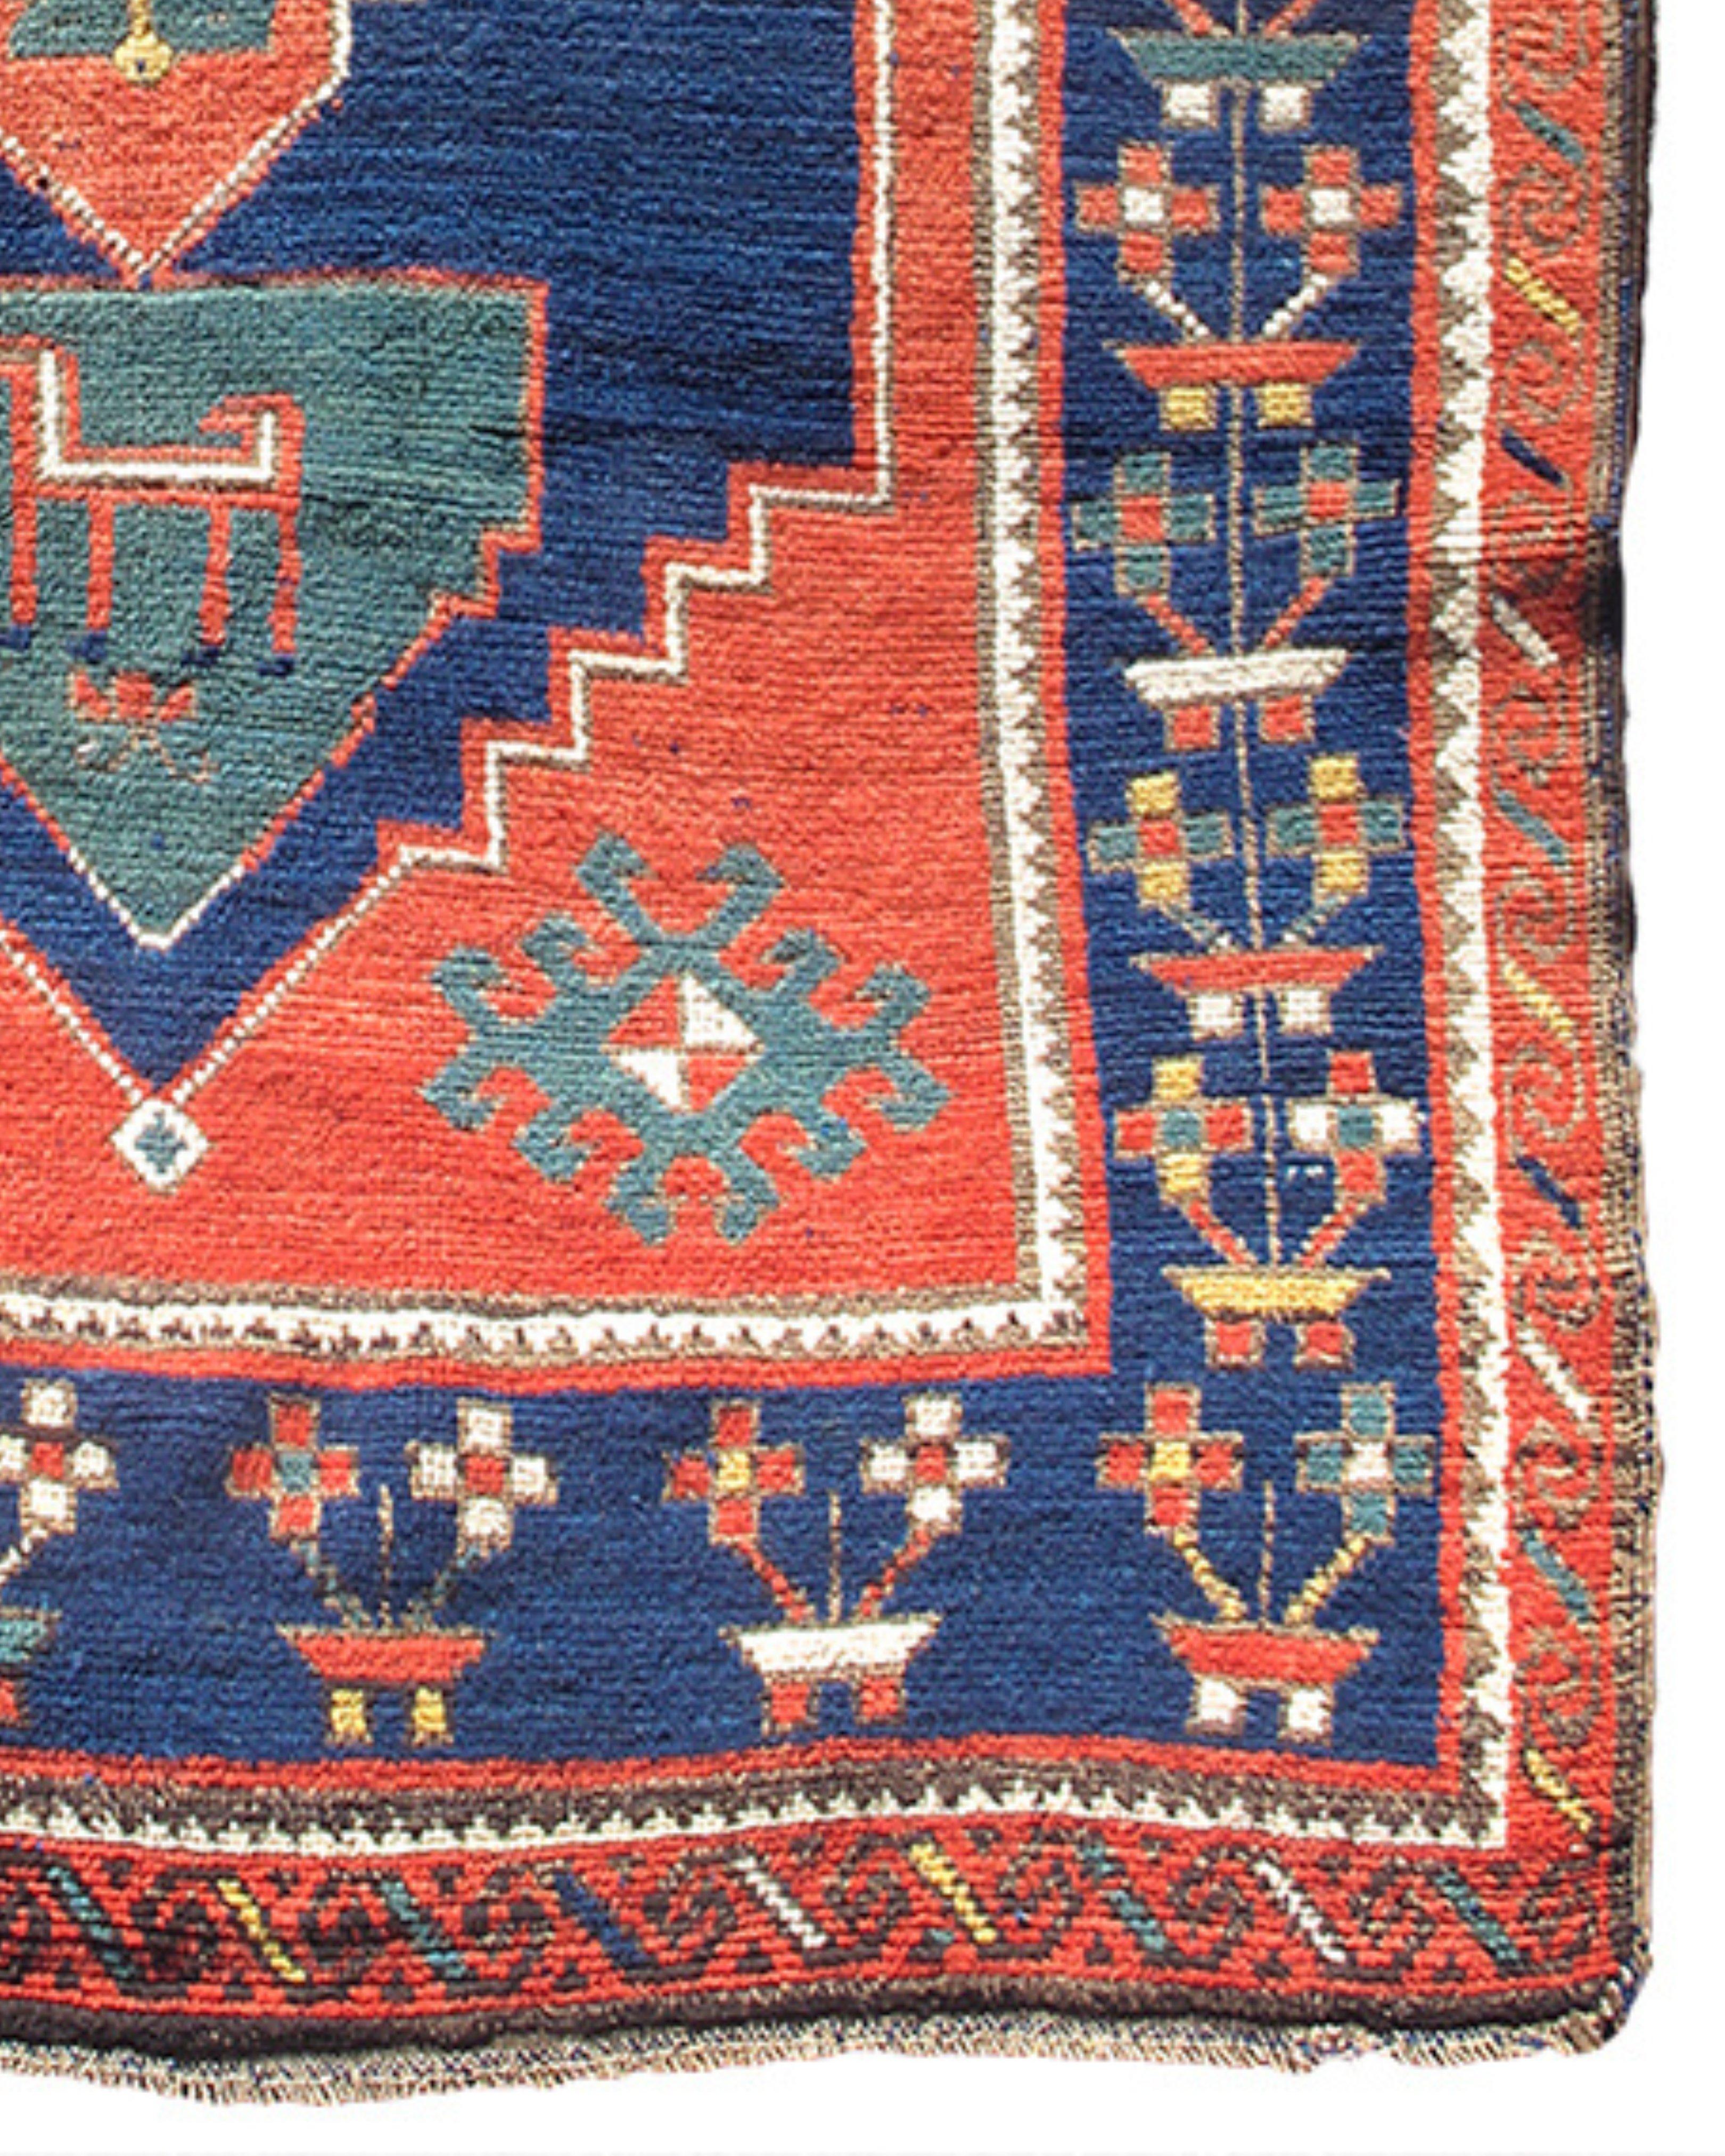 Wool Antique Caucasian Karabagh Rug, Late 19th Century For Sale